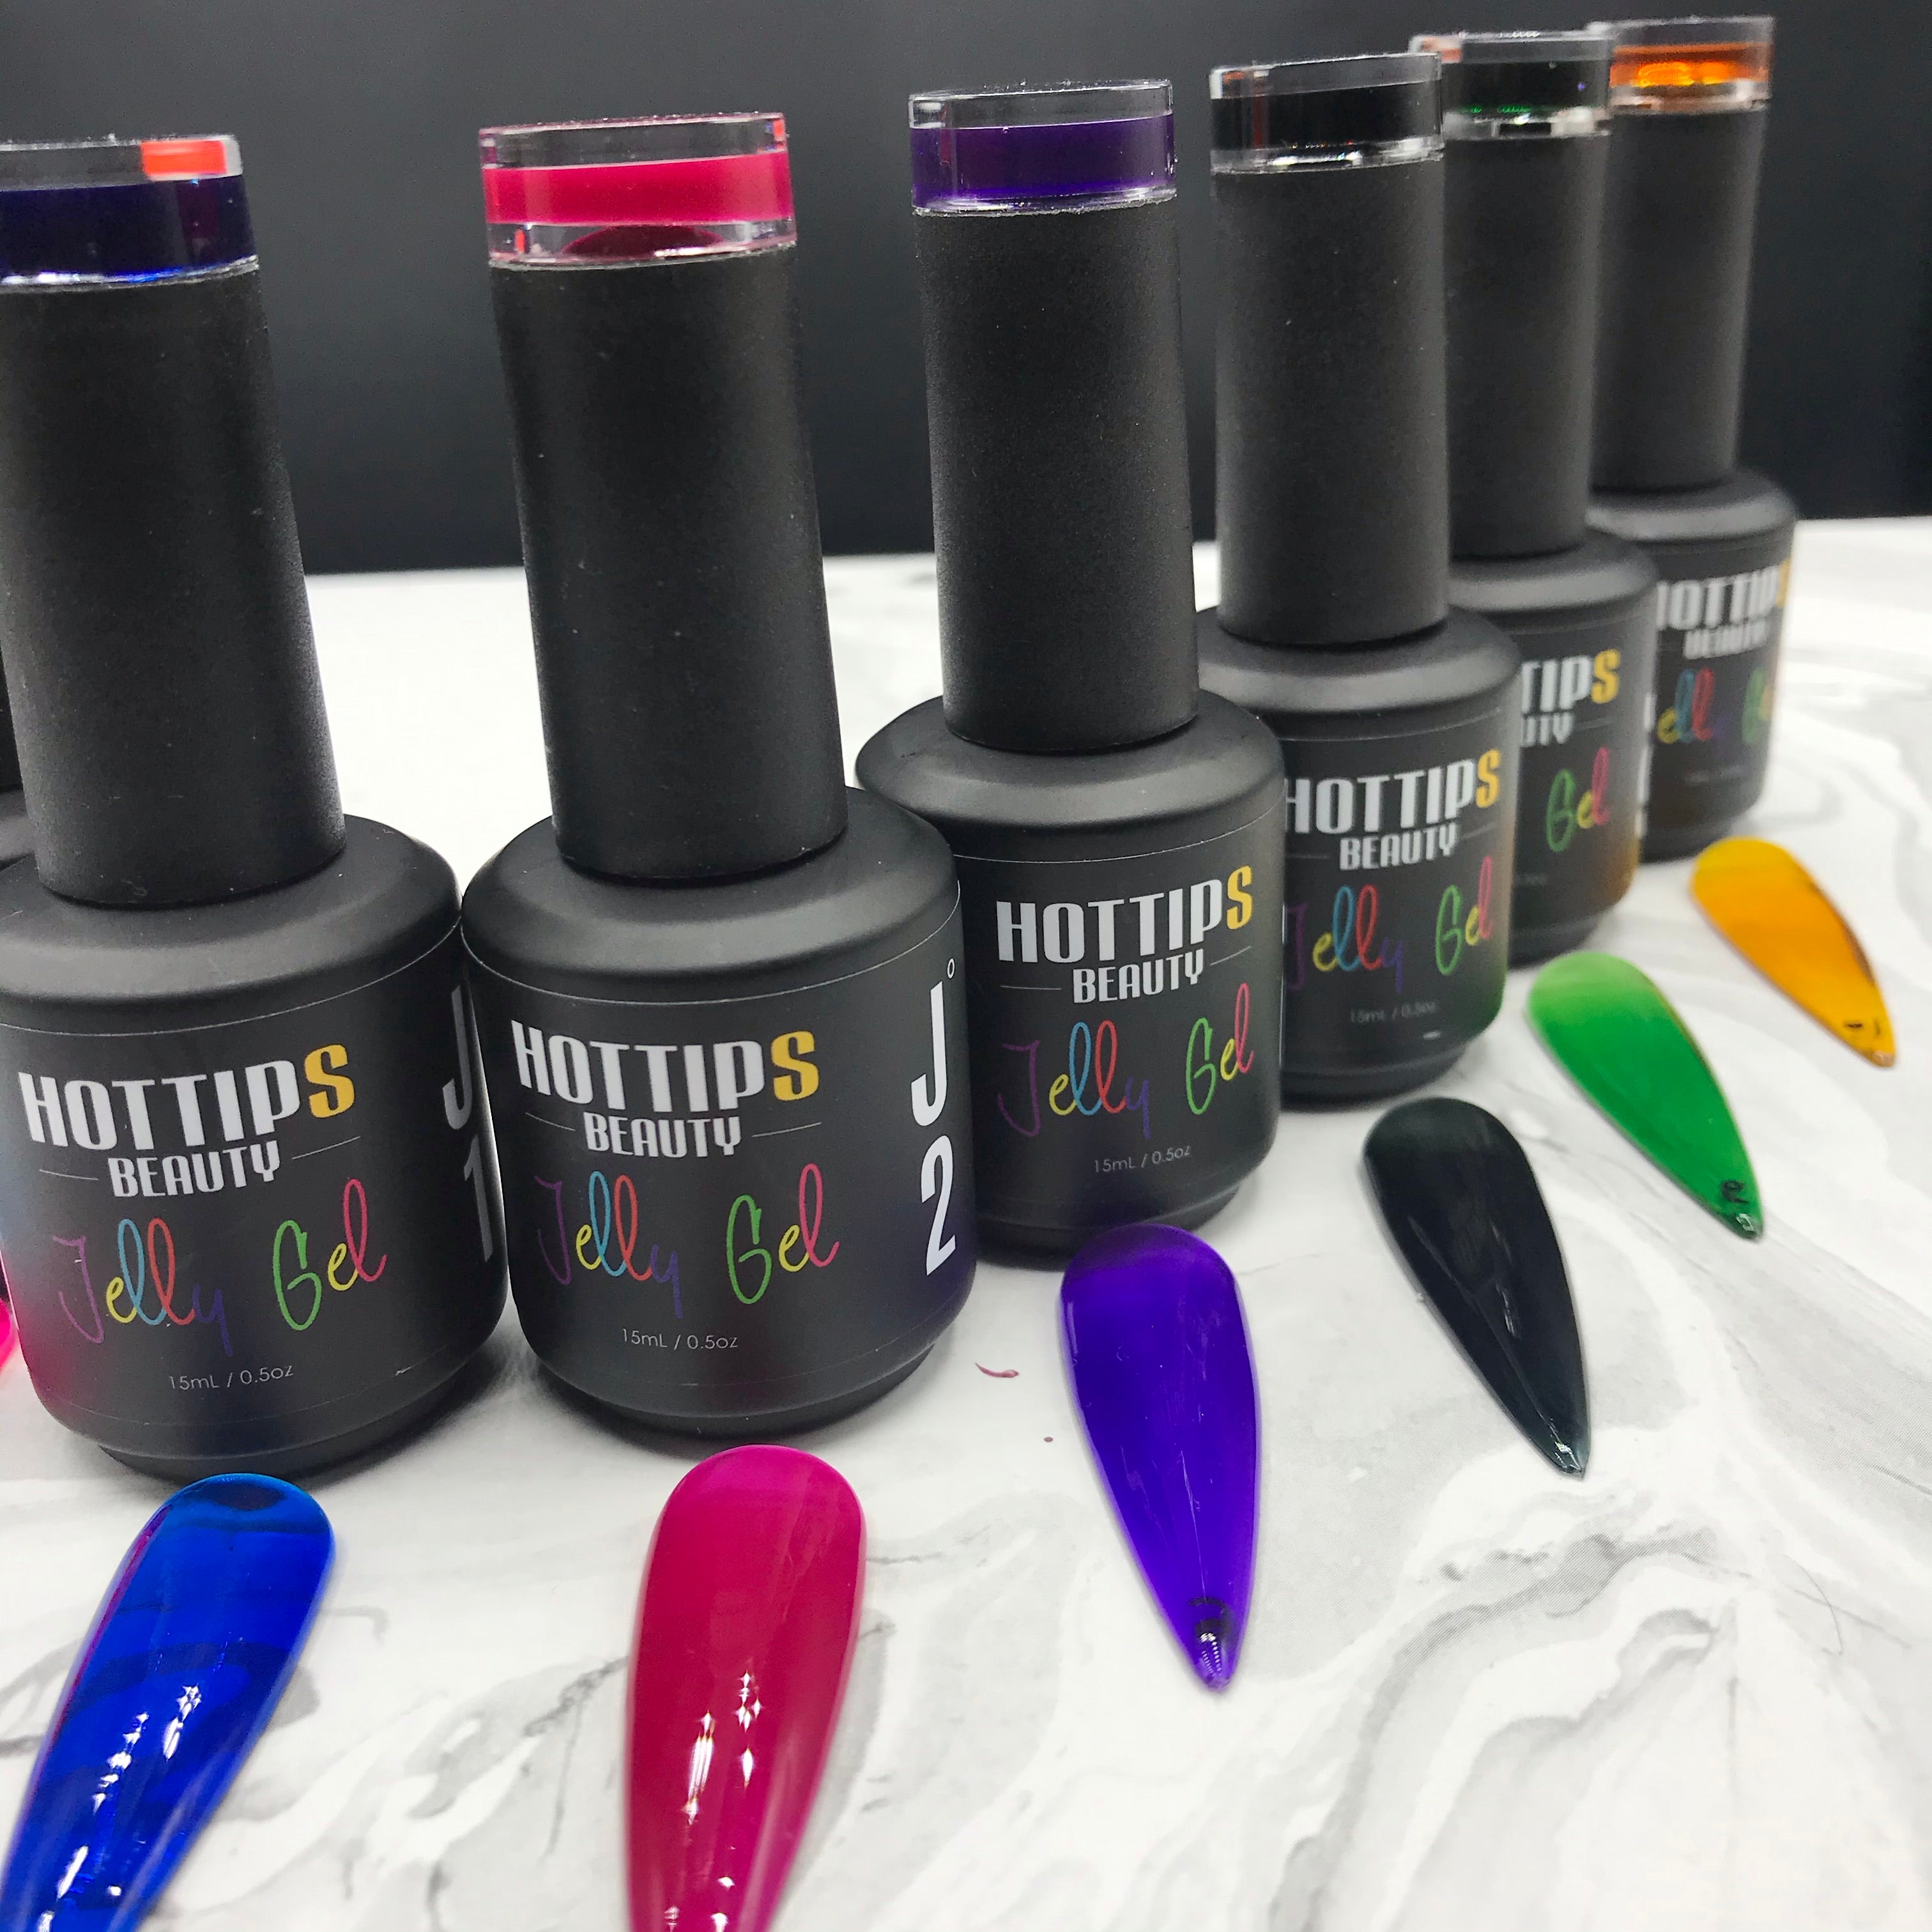 Jelly Gel: Buy 10-Color Collection